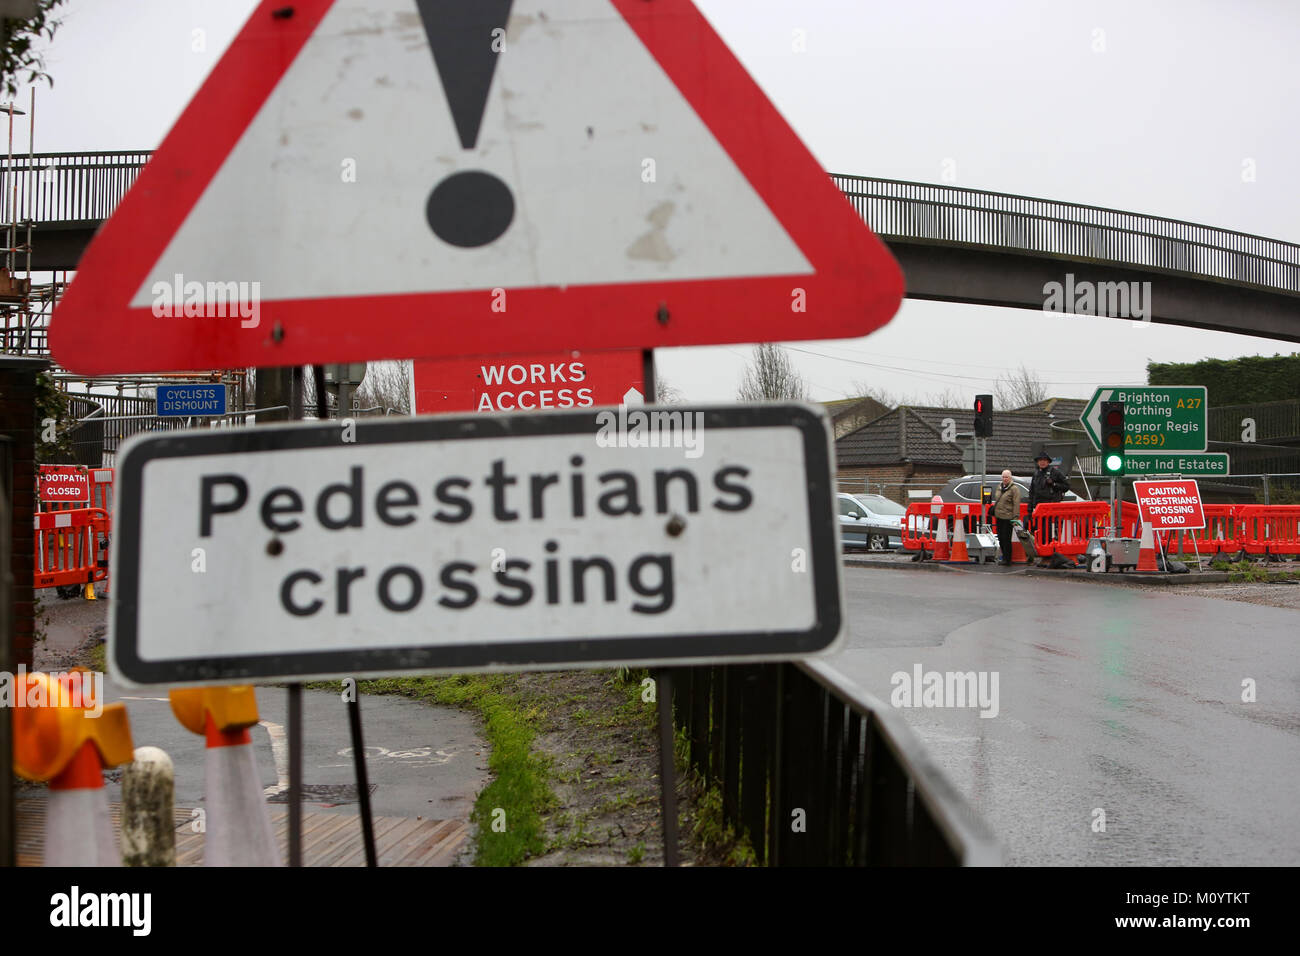 Road works pictured on the A27 in Chichester, West Sussex. Work to a pedestrian footbridge has brought in temporary traffic lights causing delays. Stock Photo